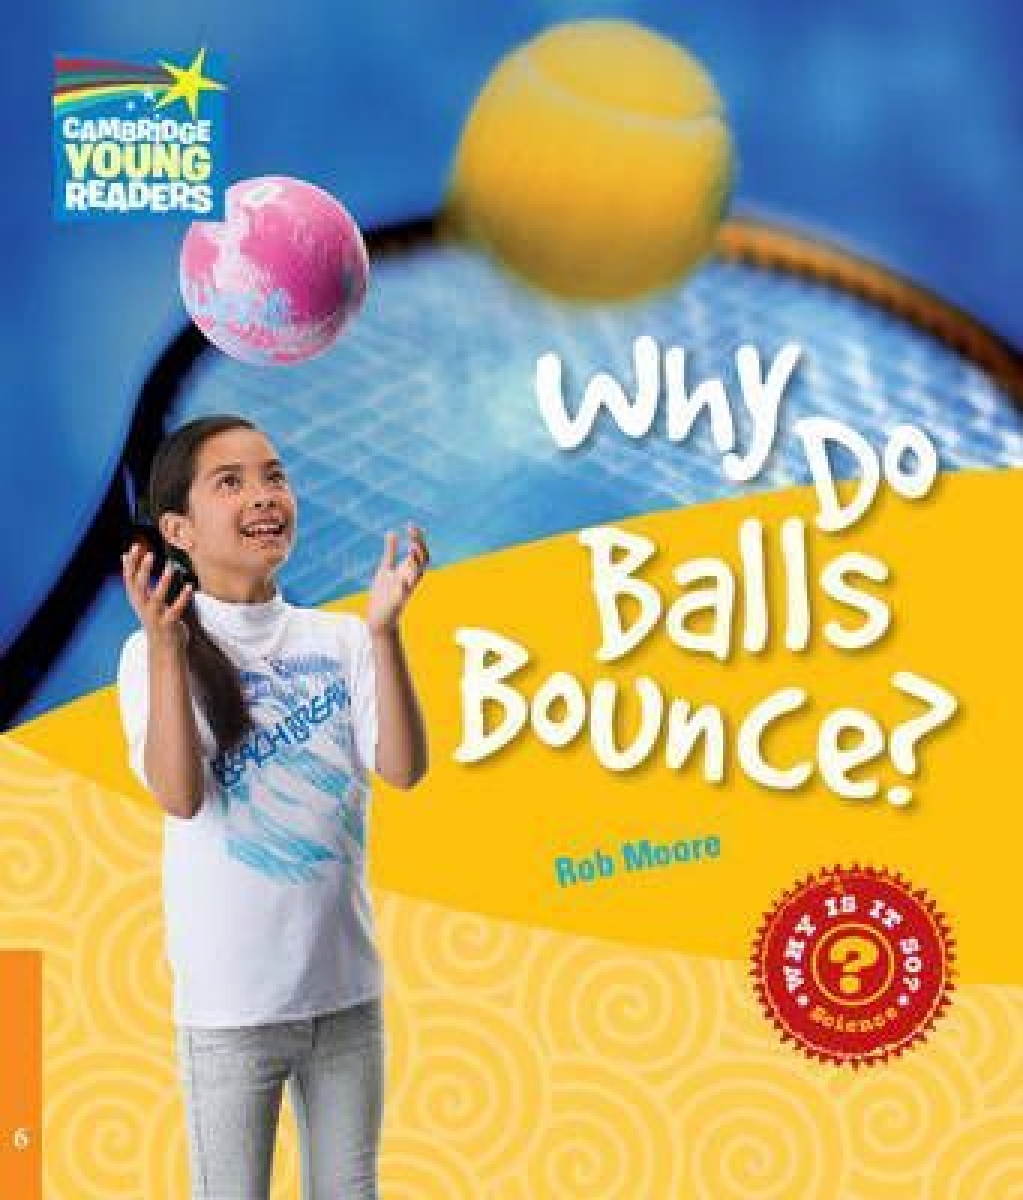 Rob Moore Factbooks: Why is it so? Level 6 Why Do Balls Bounce? 